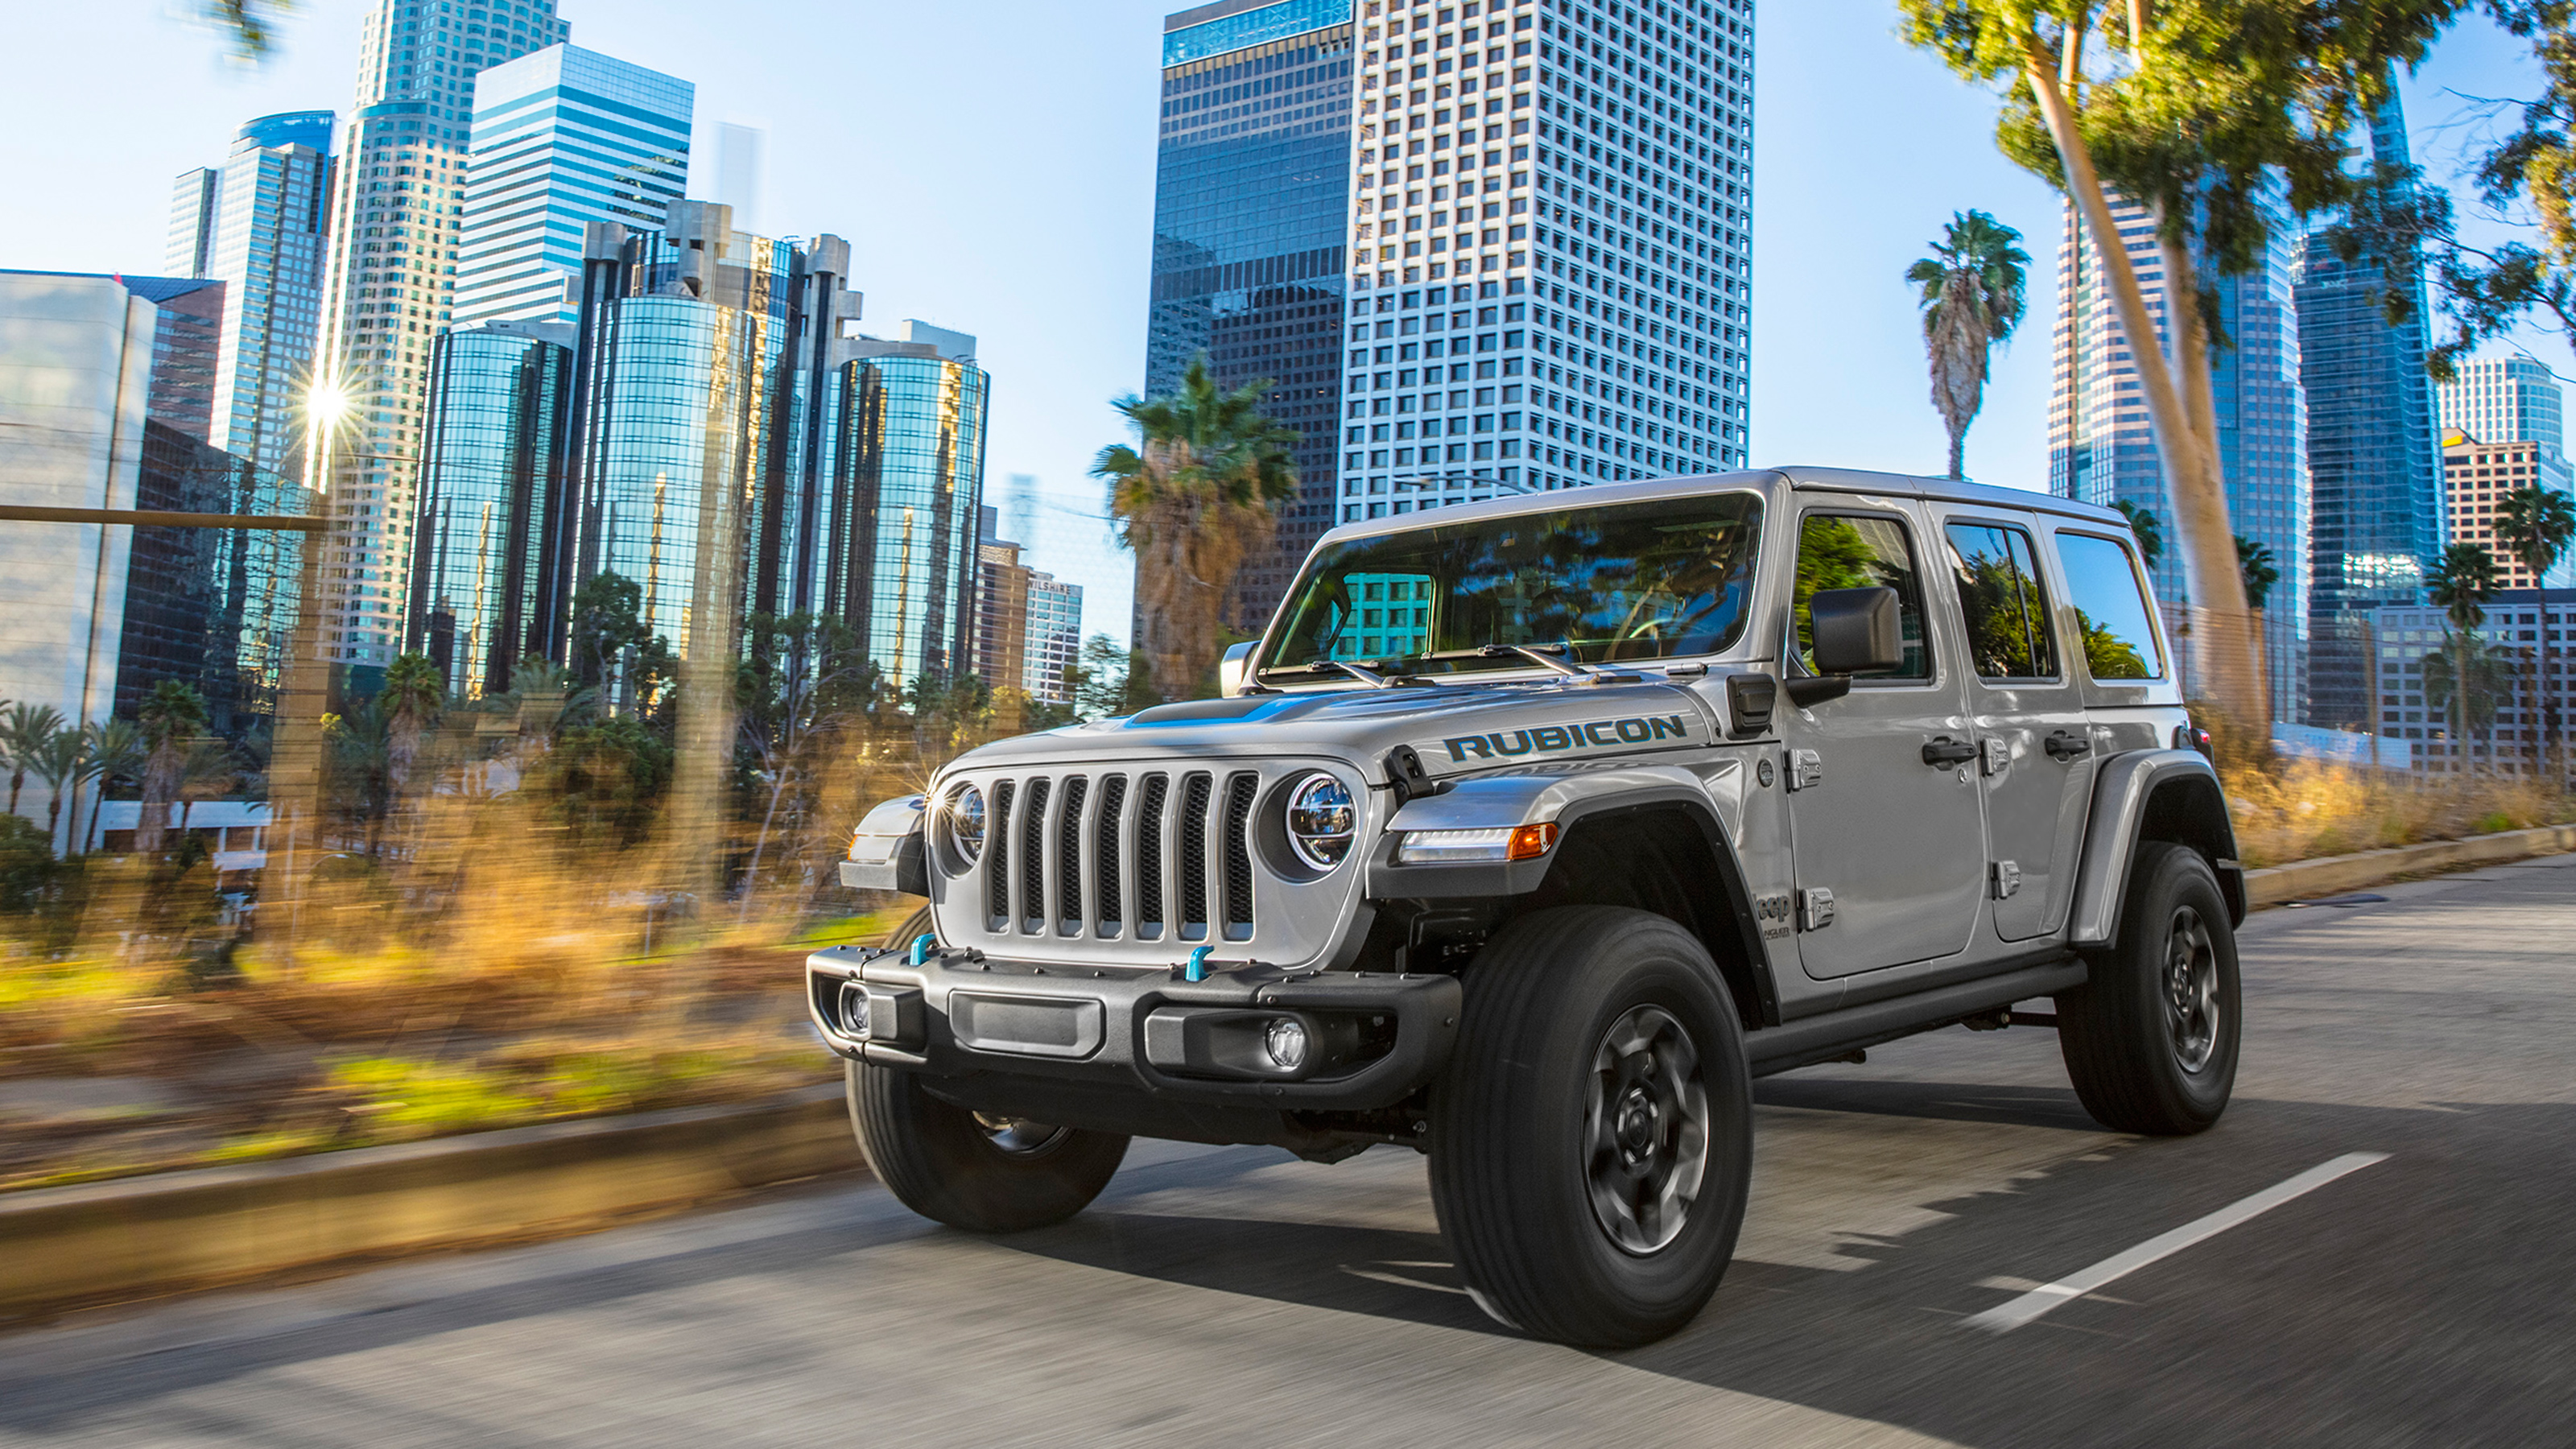 New 2020 Jeep Wrangler 4xe Plug In Hybrid Offroader Arrives Auto Express